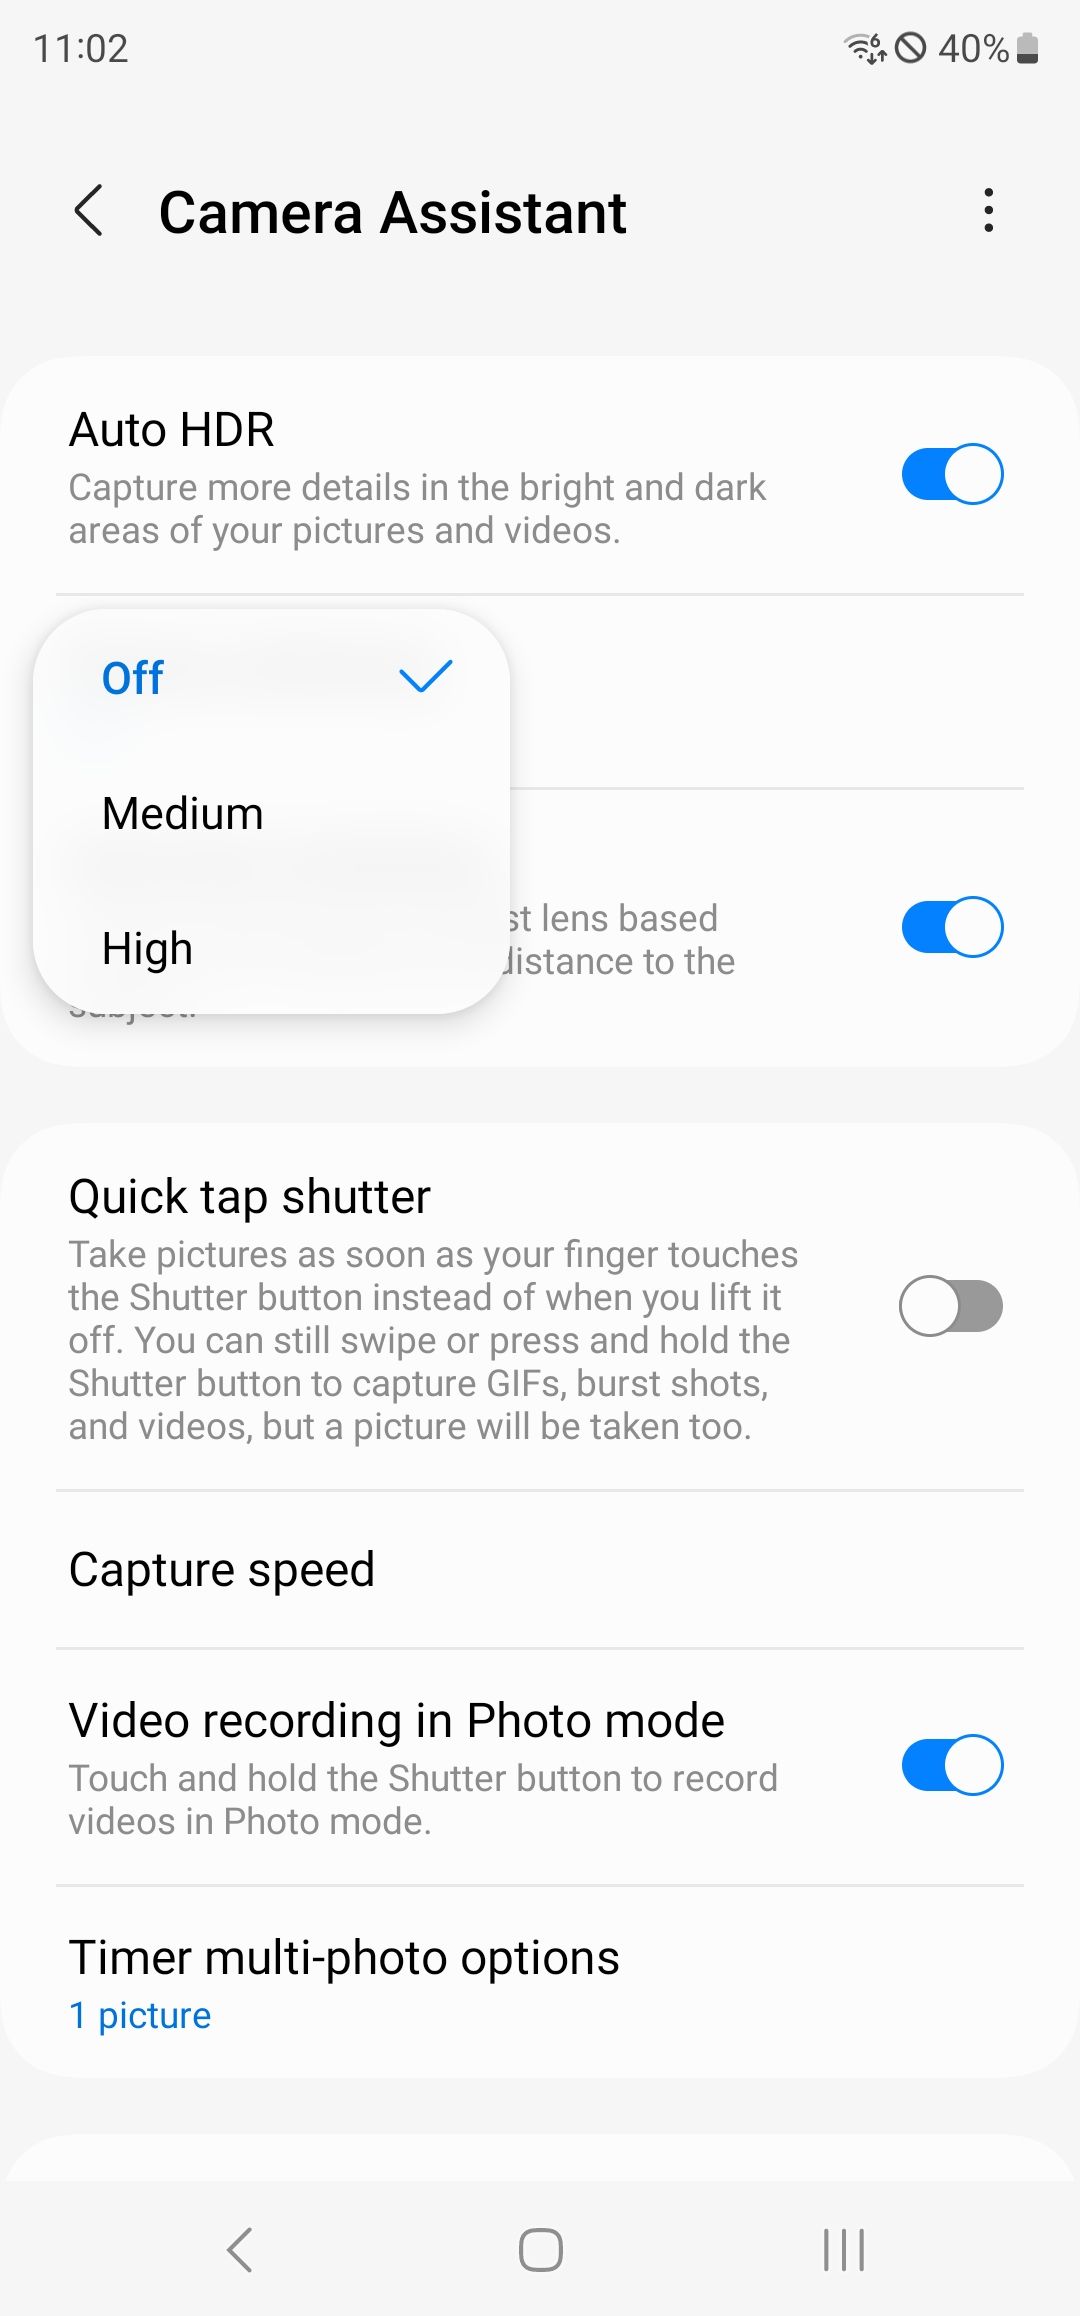 Camera Assistant picture softening options